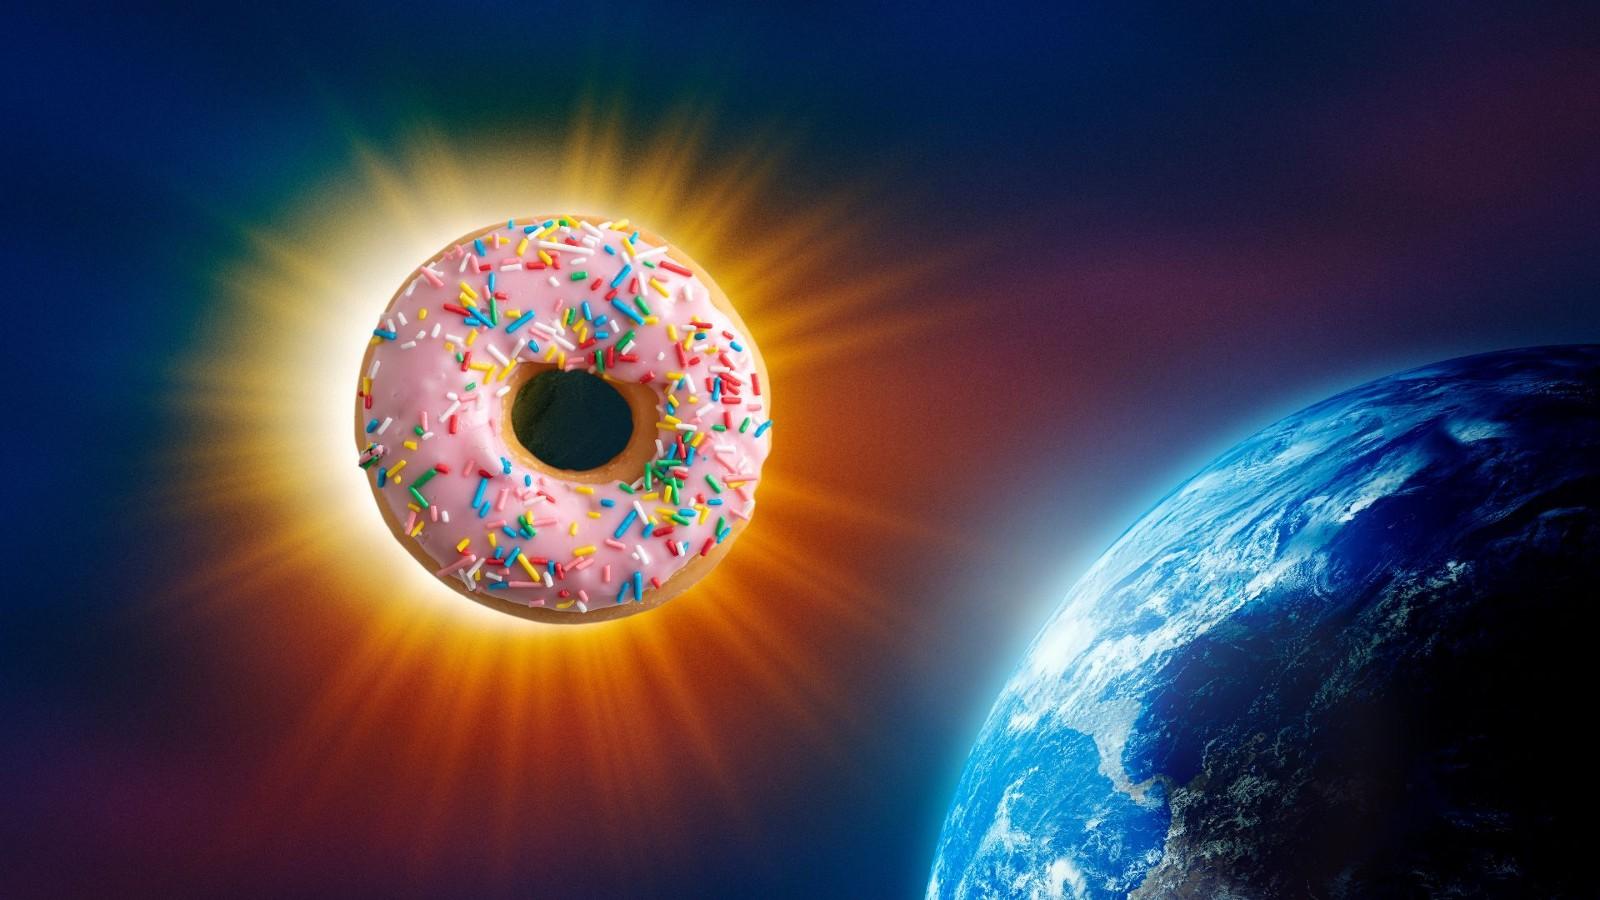 A donut as the sun during a solar eclipse